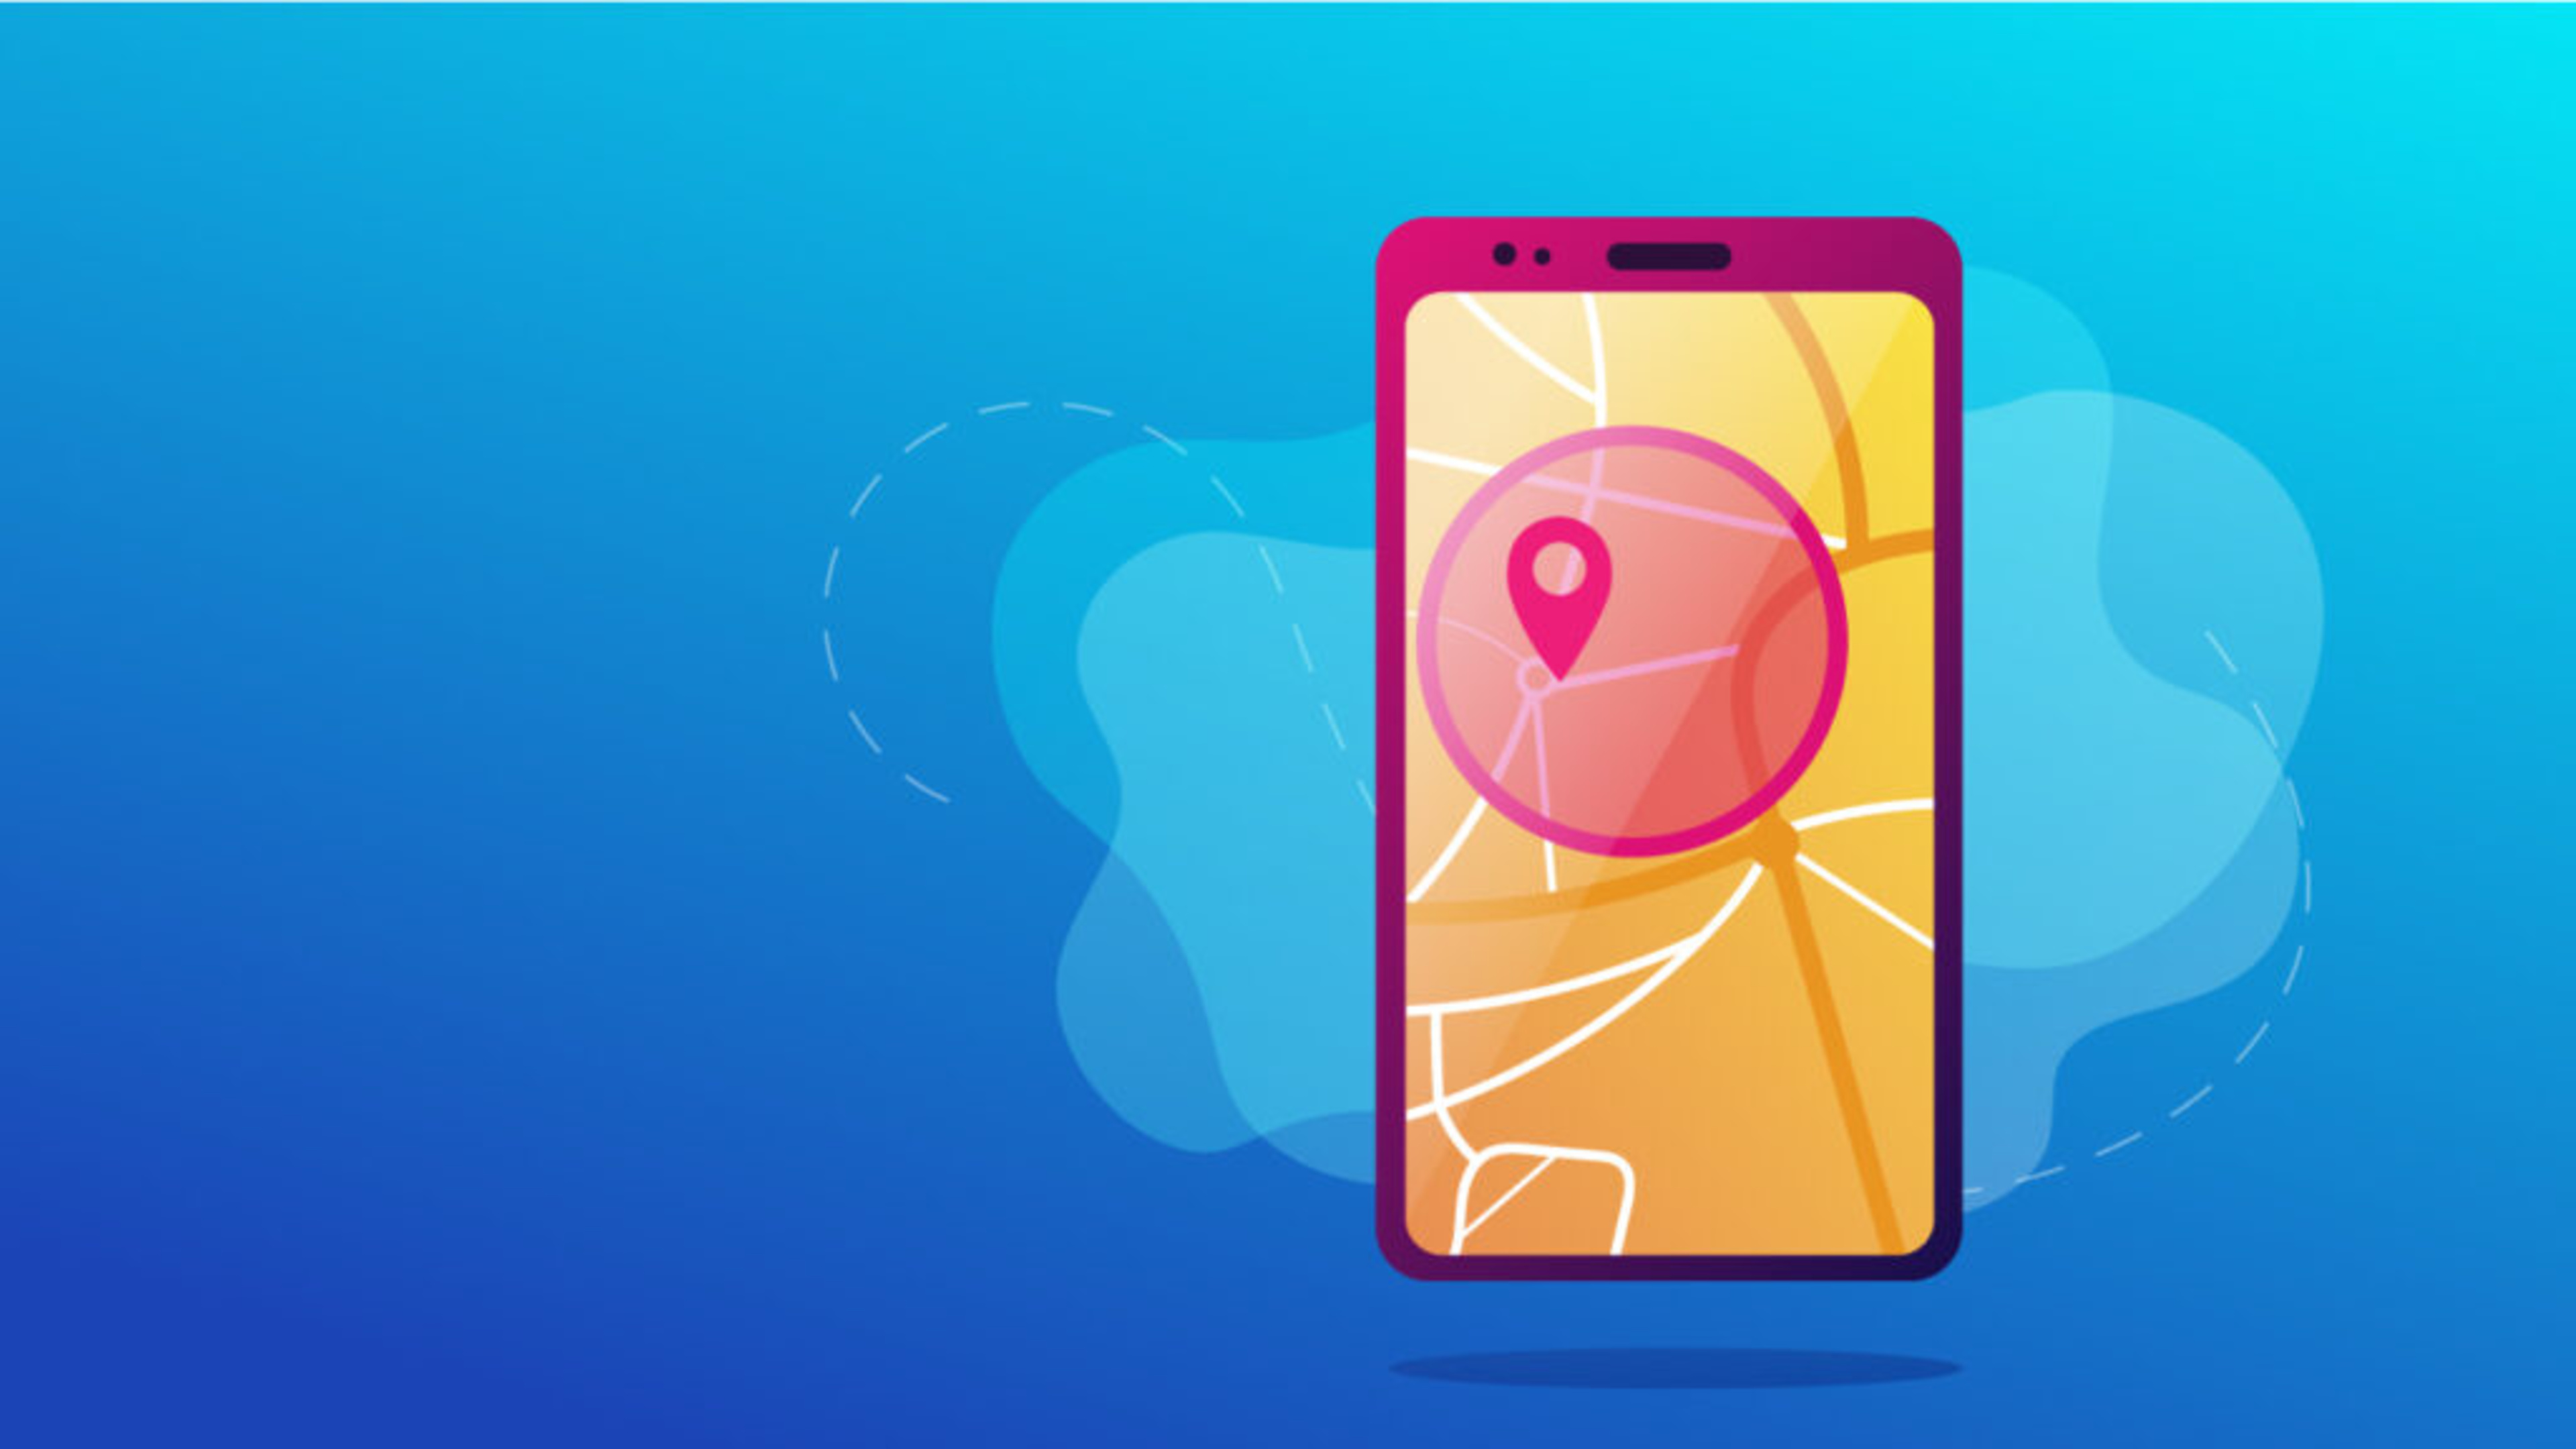 A guide to geofences with mobile applications